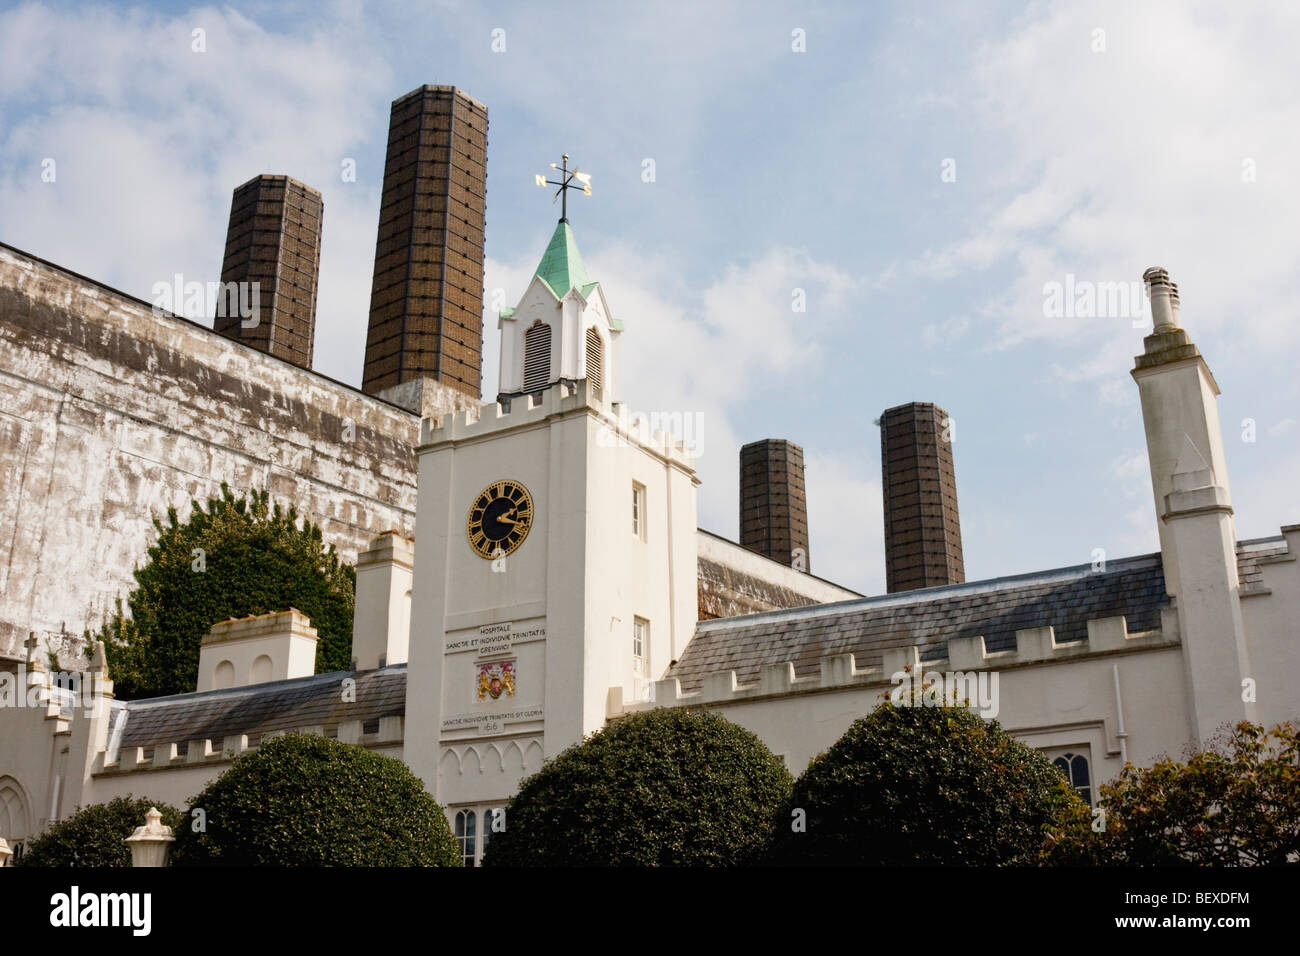 Trinity College Almshouses in Greenwich, London UK. Stock Photo